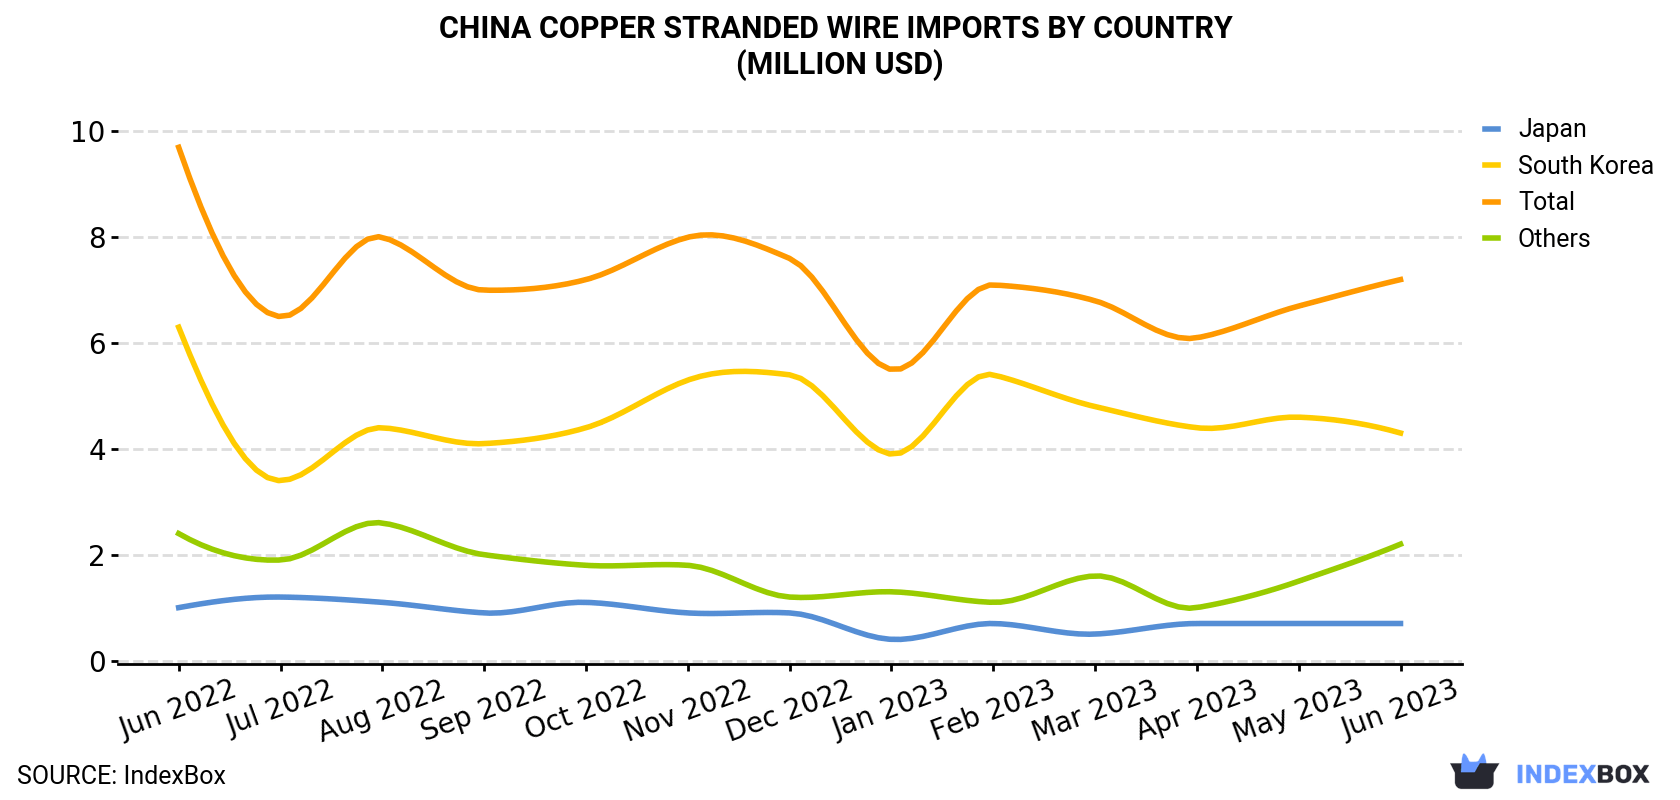 China Copper Stranded Wire Imports By Country (Million USD)